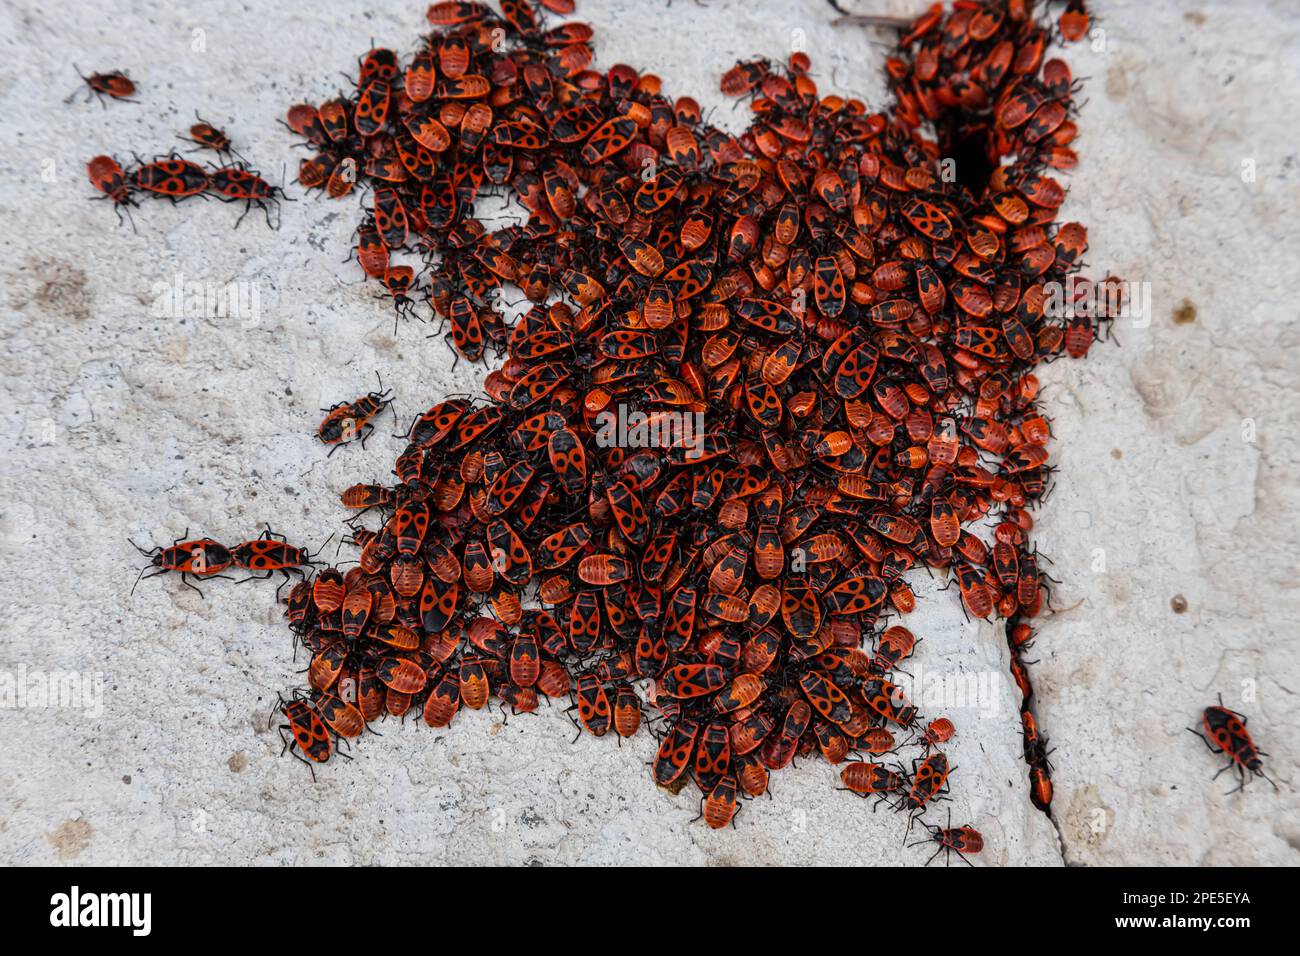 large colony of red and black beetles on a stone Stock Photo